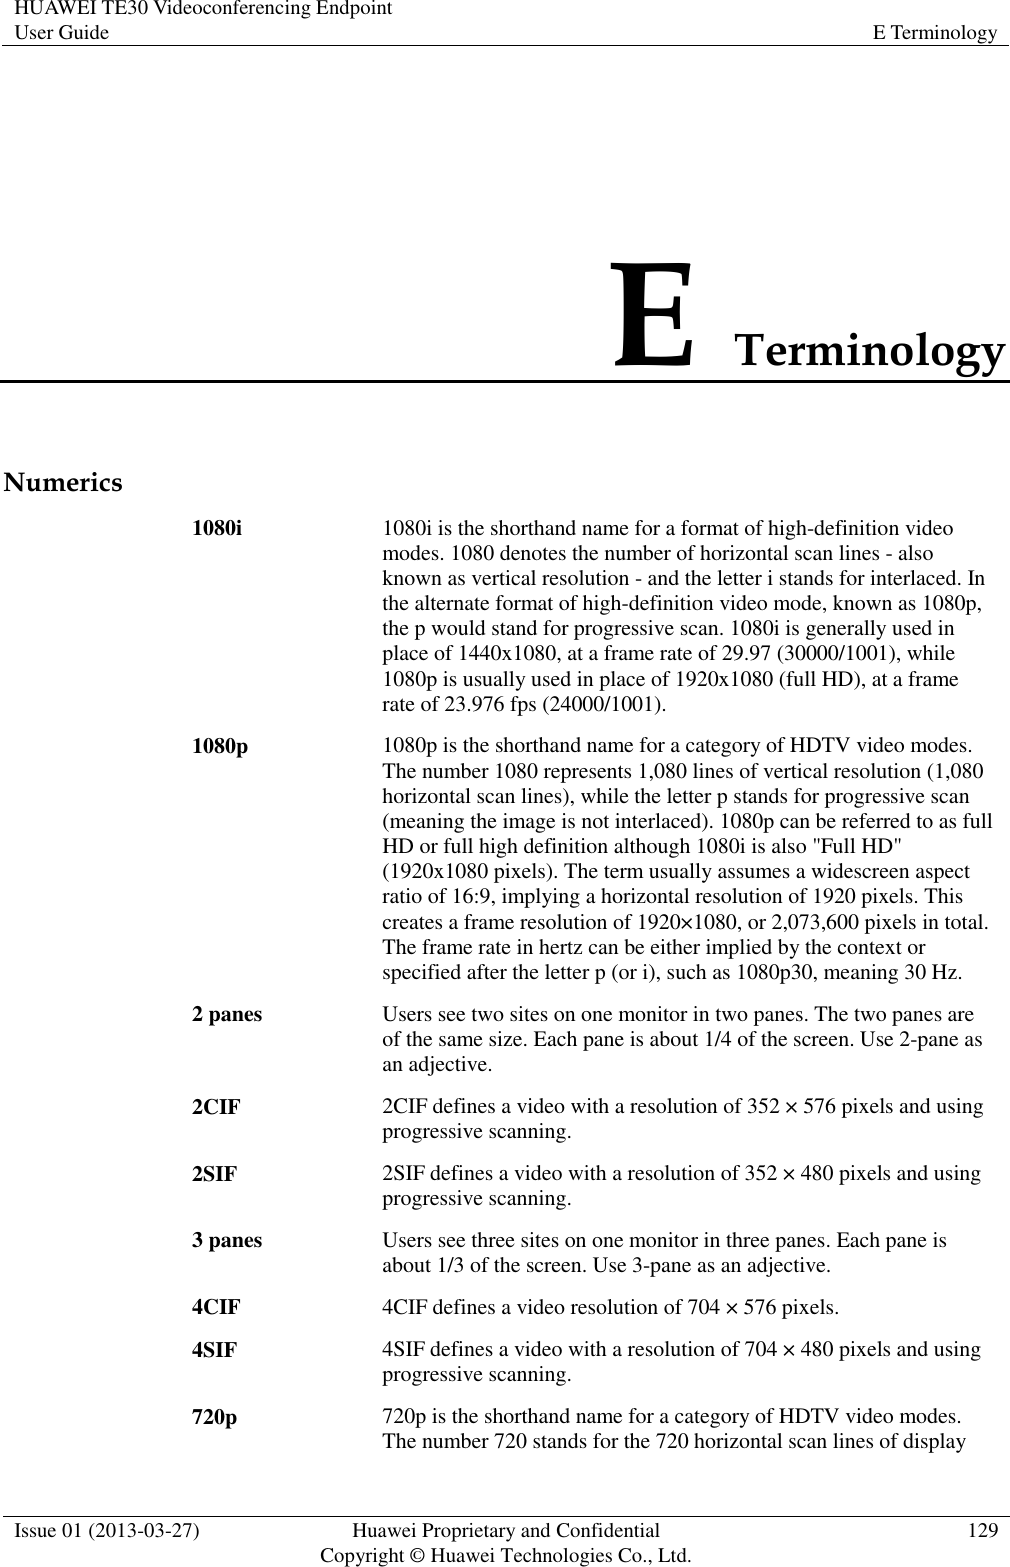 HUAWEI TE30 Videoconferencing Endpoint User Guide E Terminology  Issue 01 (2013-03-27) Huawei Proprietary and Confidential                                     Copyright © Huawei Technologies Co., Ltd. 129  E Terminology Numerics 1080i 1080i is the shorthand name for a format of high-definition video modes. 1080 denotes the number of horizontal scan lines - also known as vertical resolution - and the letter i stands for interlaced. In the alternate format of high-definition video mode, known as 1080p, the p would stand for progressive scan. 1080i is generally used in place of 1440x1080, at a frame rate of 29.97 (30000/1001), while 1080p is usually used in place of 1920x1080 (full HD), at a frame rate of 23.976 fps (24000/1001). 1080p 1080p is the shorthand name for a category of HDTV video modes. The number 1080 represents 1,080 lines of vertical resolution (1,080 horizontal scan lines), while the letter p stands for progressive scan (meaning the image is not interlaced). 1080p can be referred to as full HD or full high definition although 1080i is also &quot;Full HD&quot; (1920x1080 pixels). The term usually assumes a widescreen aspect ratio of 16:9, implying a horizontal resolution of 1920 pixels. This creates a frame resolution of 1920×1080, or 2,073,600 pixels in total. The frame rate in hertz can be either implied by the context or specified after the letter p (or i), such as 1080p30, meaning 30 Hz. 2 panes Users see two sites on one monitor in two panes. The two panes are of the same size. Each pane is about 1/4 of the screen. Use 2-pane as an adjective. 2CIF 2CIF defines a video with a resolution of 352 × 576 pixels and using progressive scanning. 2SIF 2SIF defines a video with a resolution of 352 × 480 pixels and using progressive scanning. 3 panes Users see three sites on one monitor in three panes. Each pane is about 1/3 of the screen. Use 3-pane as an adjective. 4CIF 4CIF defines a video resolution of 704 × 576 pixels. 4SIF 4SIF defines a video with a resolution of 704 × 480 pixels and using progressive scanning. 720p 720p is the shorthand name for a category of HDTV video modes. The number 720 stands for the 720 horizontal scan lines of display 